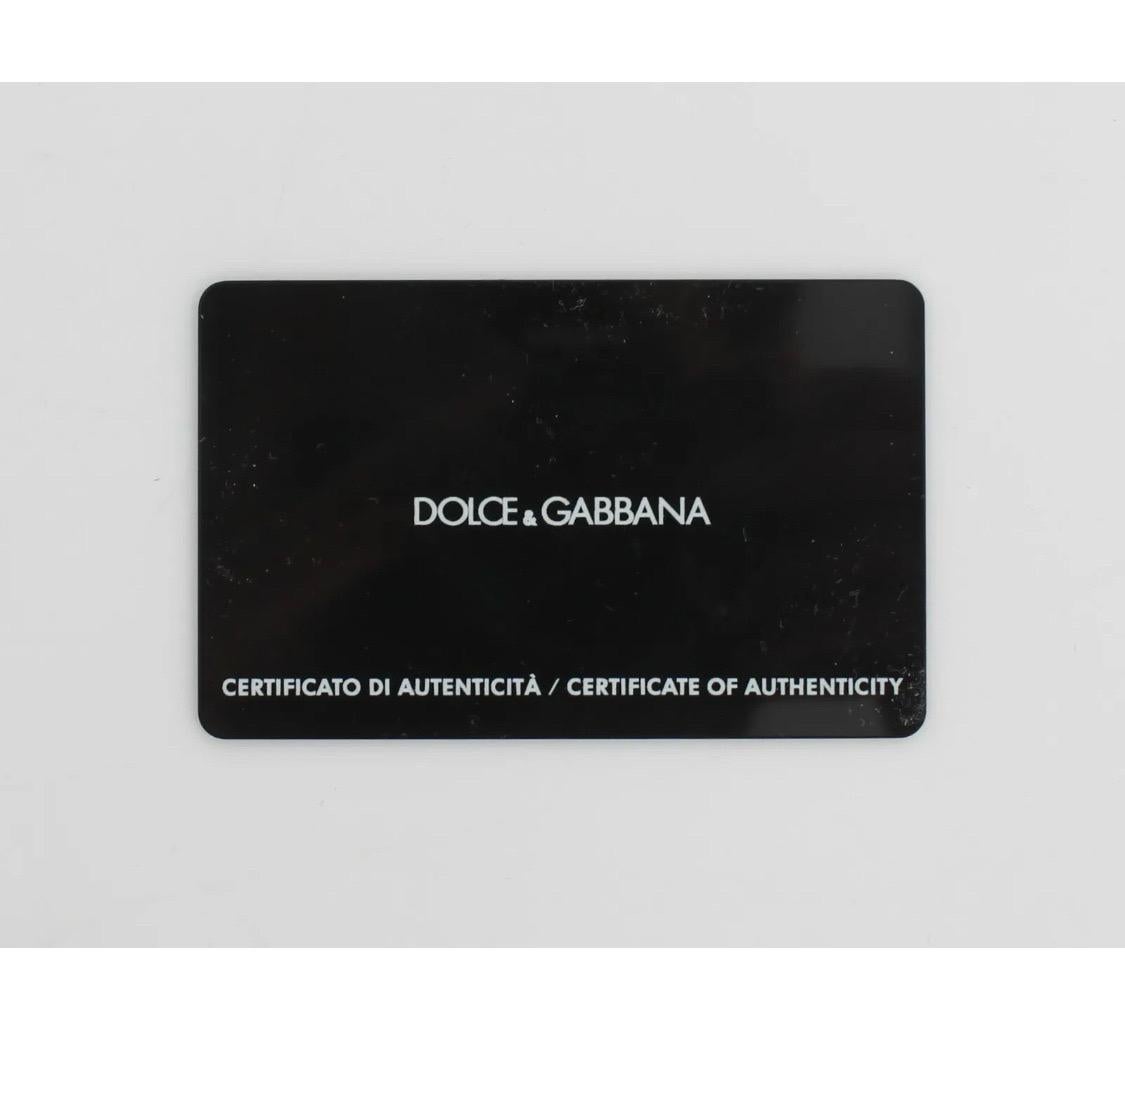 Women's Dolce & Gabbana leather bifold wallet with DG crystals features